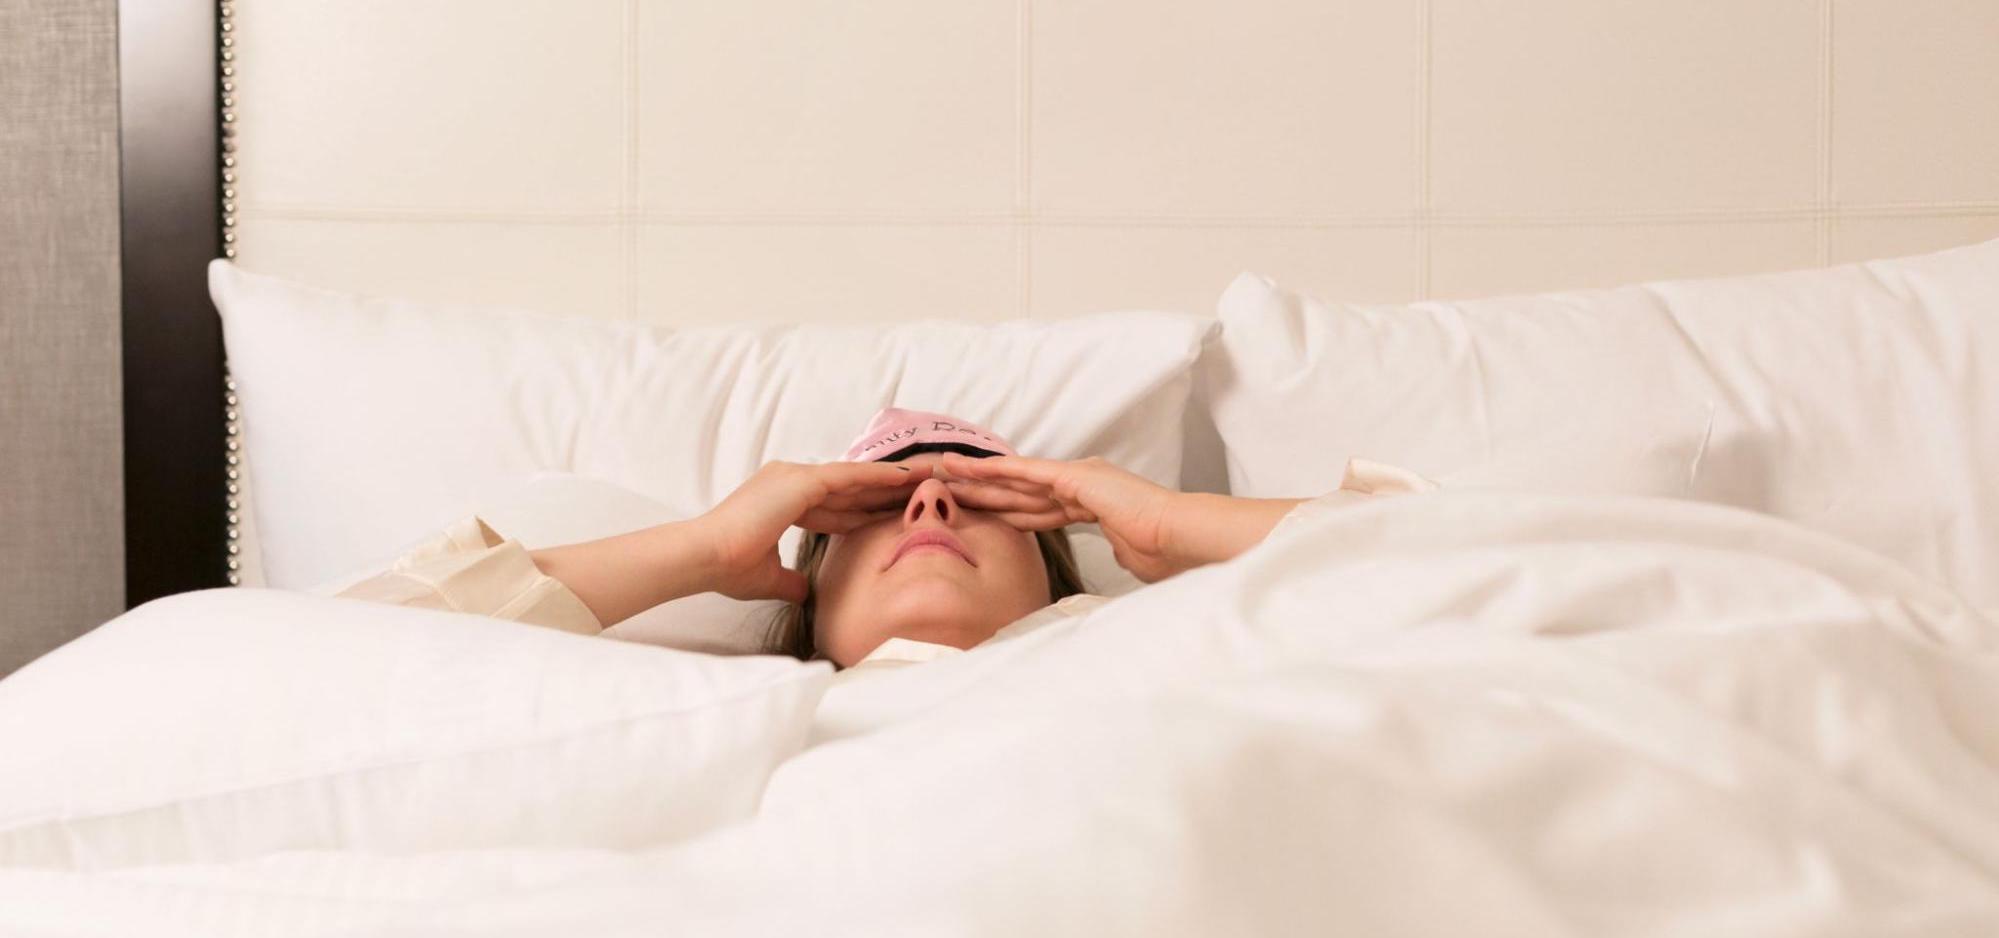 Can A Chiropractor Help With Bad Sleep?